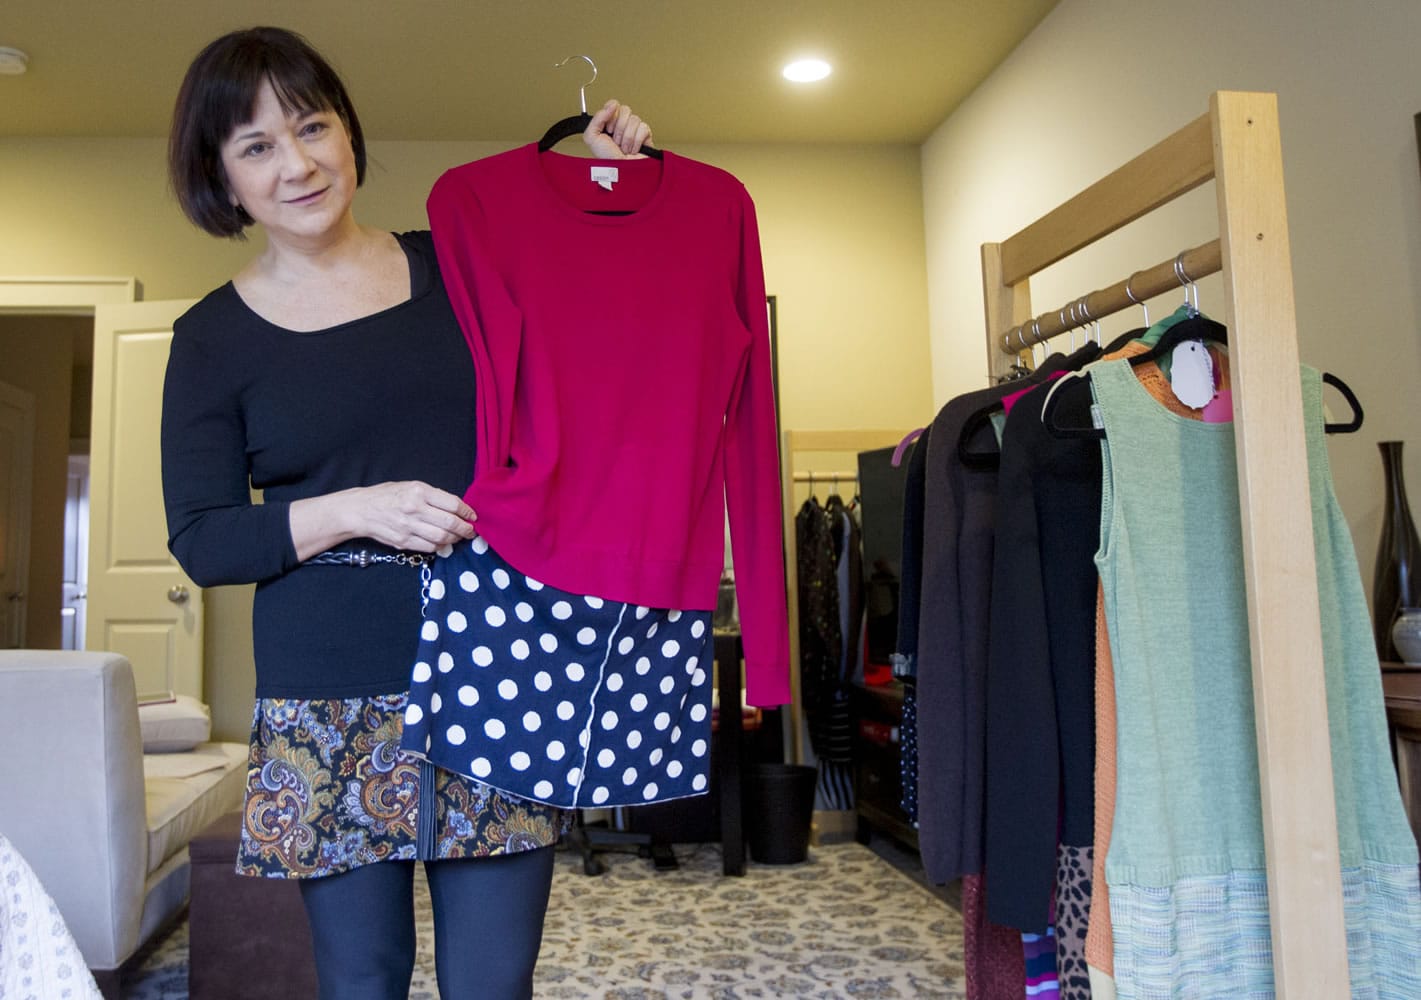 Leslie McMillan, who with her sister created a business called Sew Sisters, uses old clothing to create new apparel, such as this dress, at her home in Vancouver.